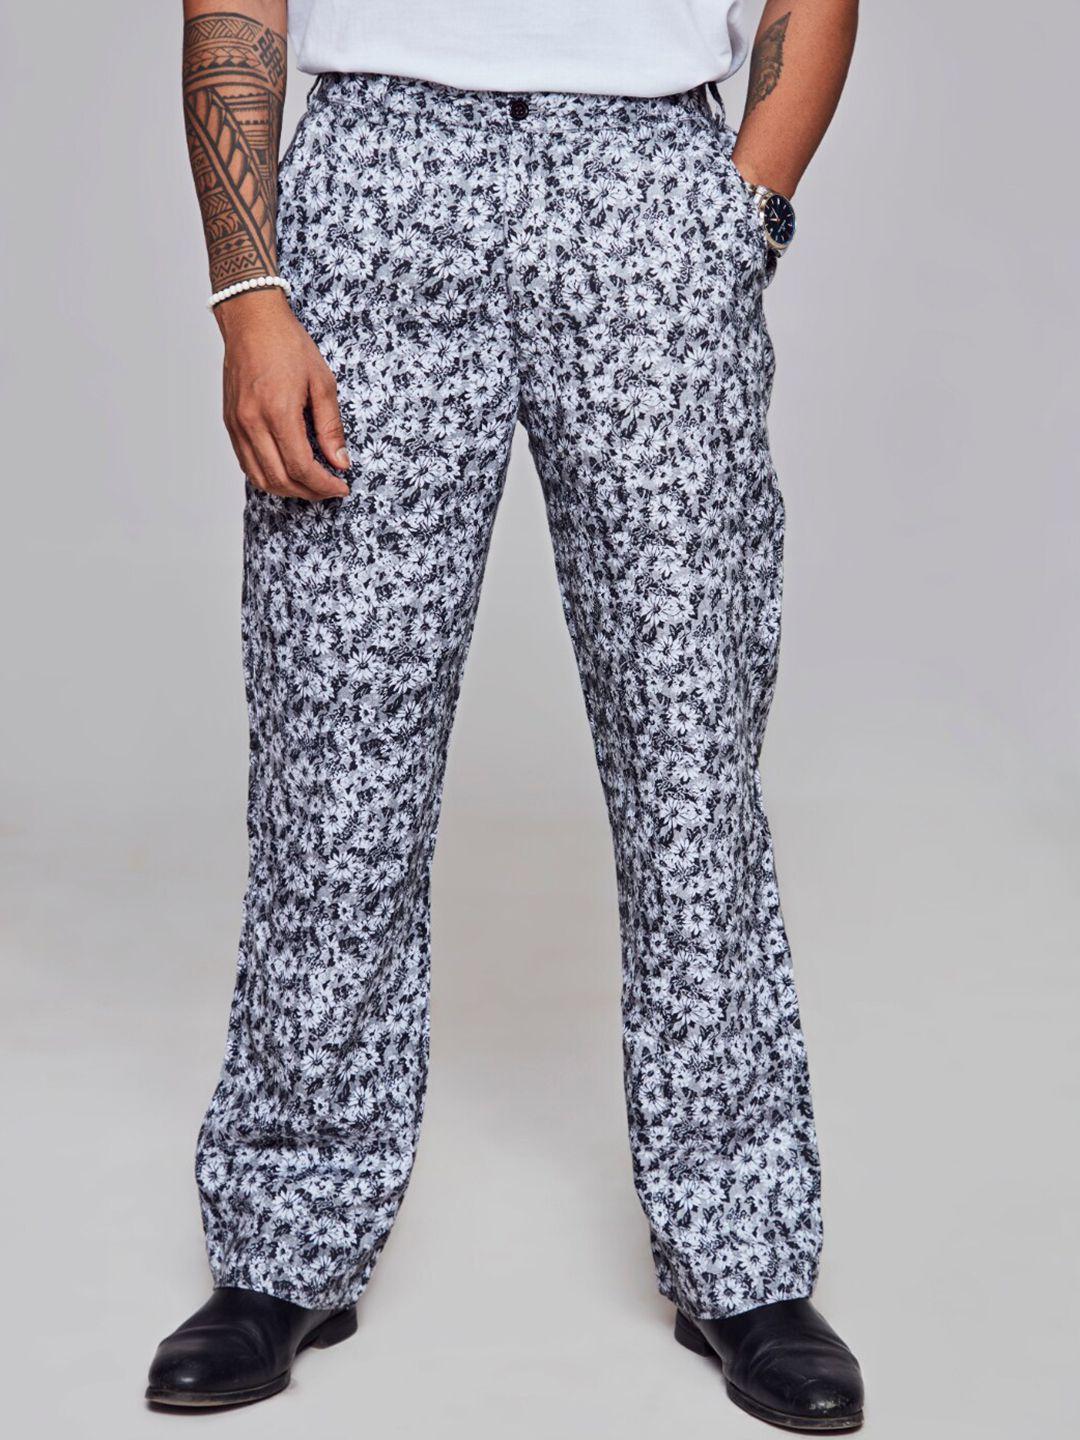 addy's for men floral printed mid rise linen trousers